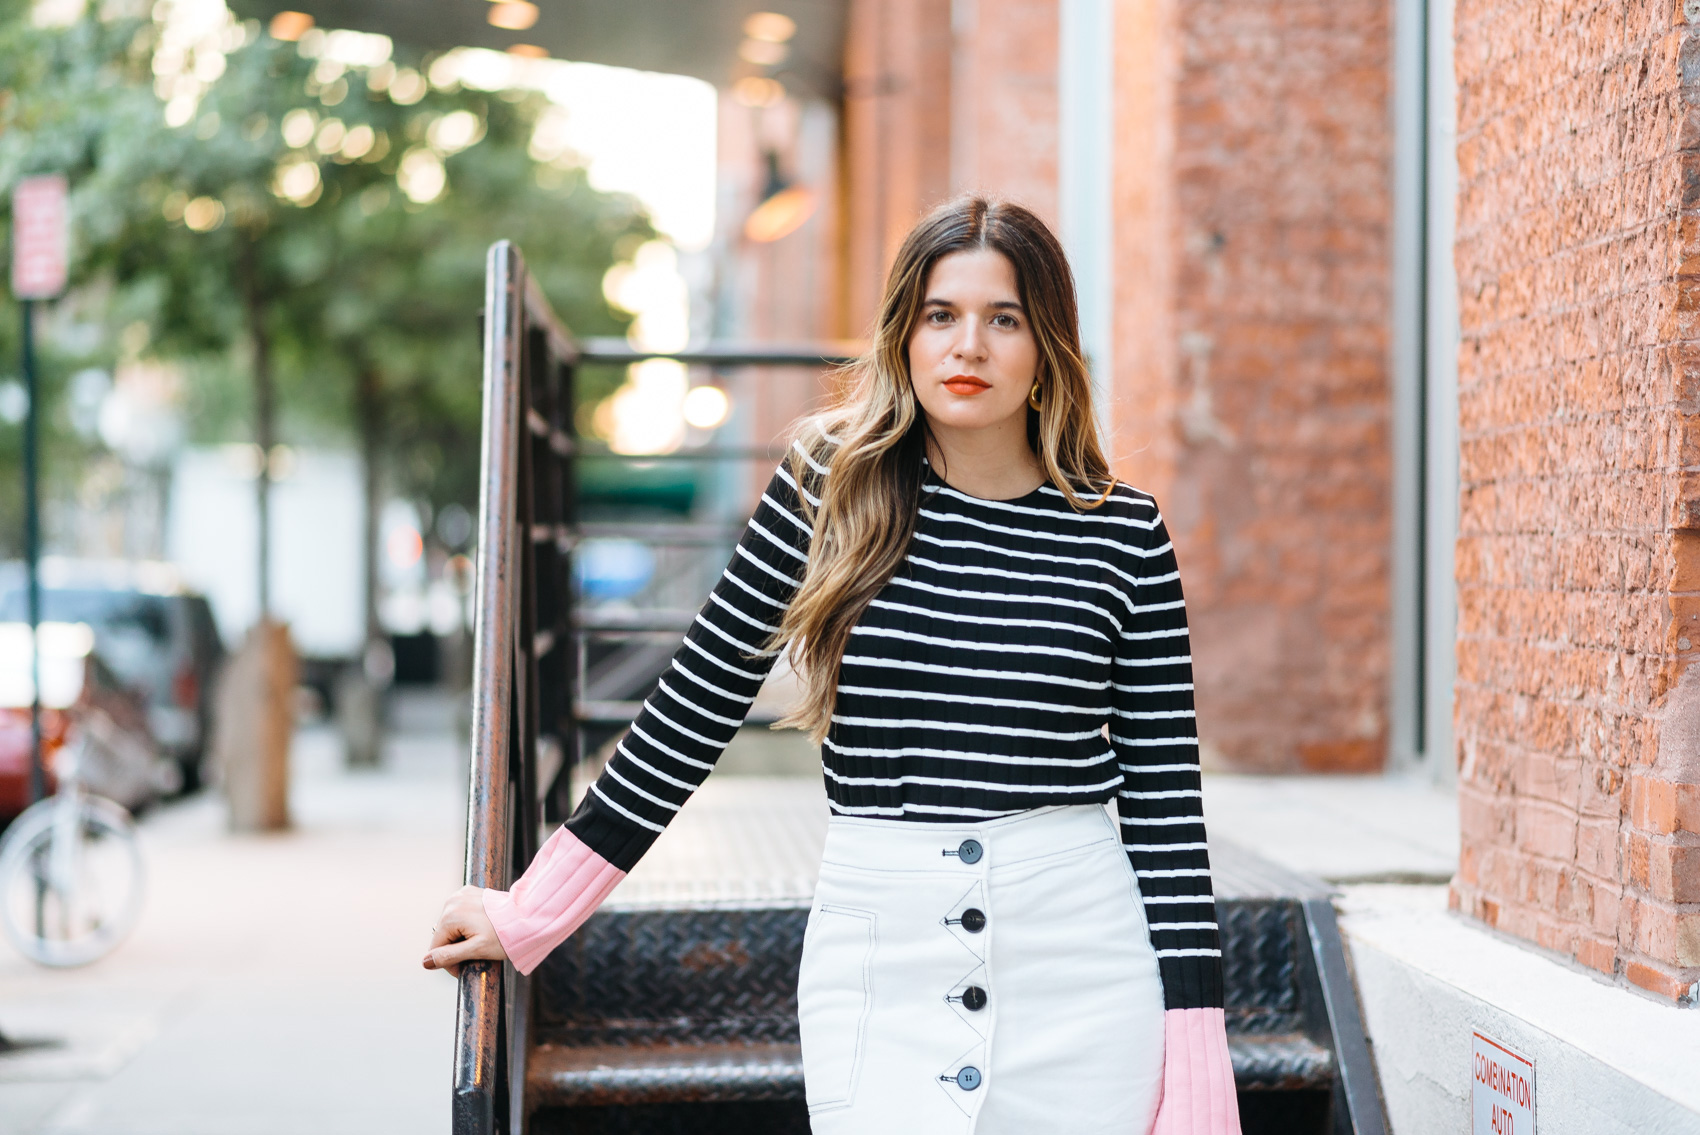 How to add a touch of pink to a black and white neutral outfit